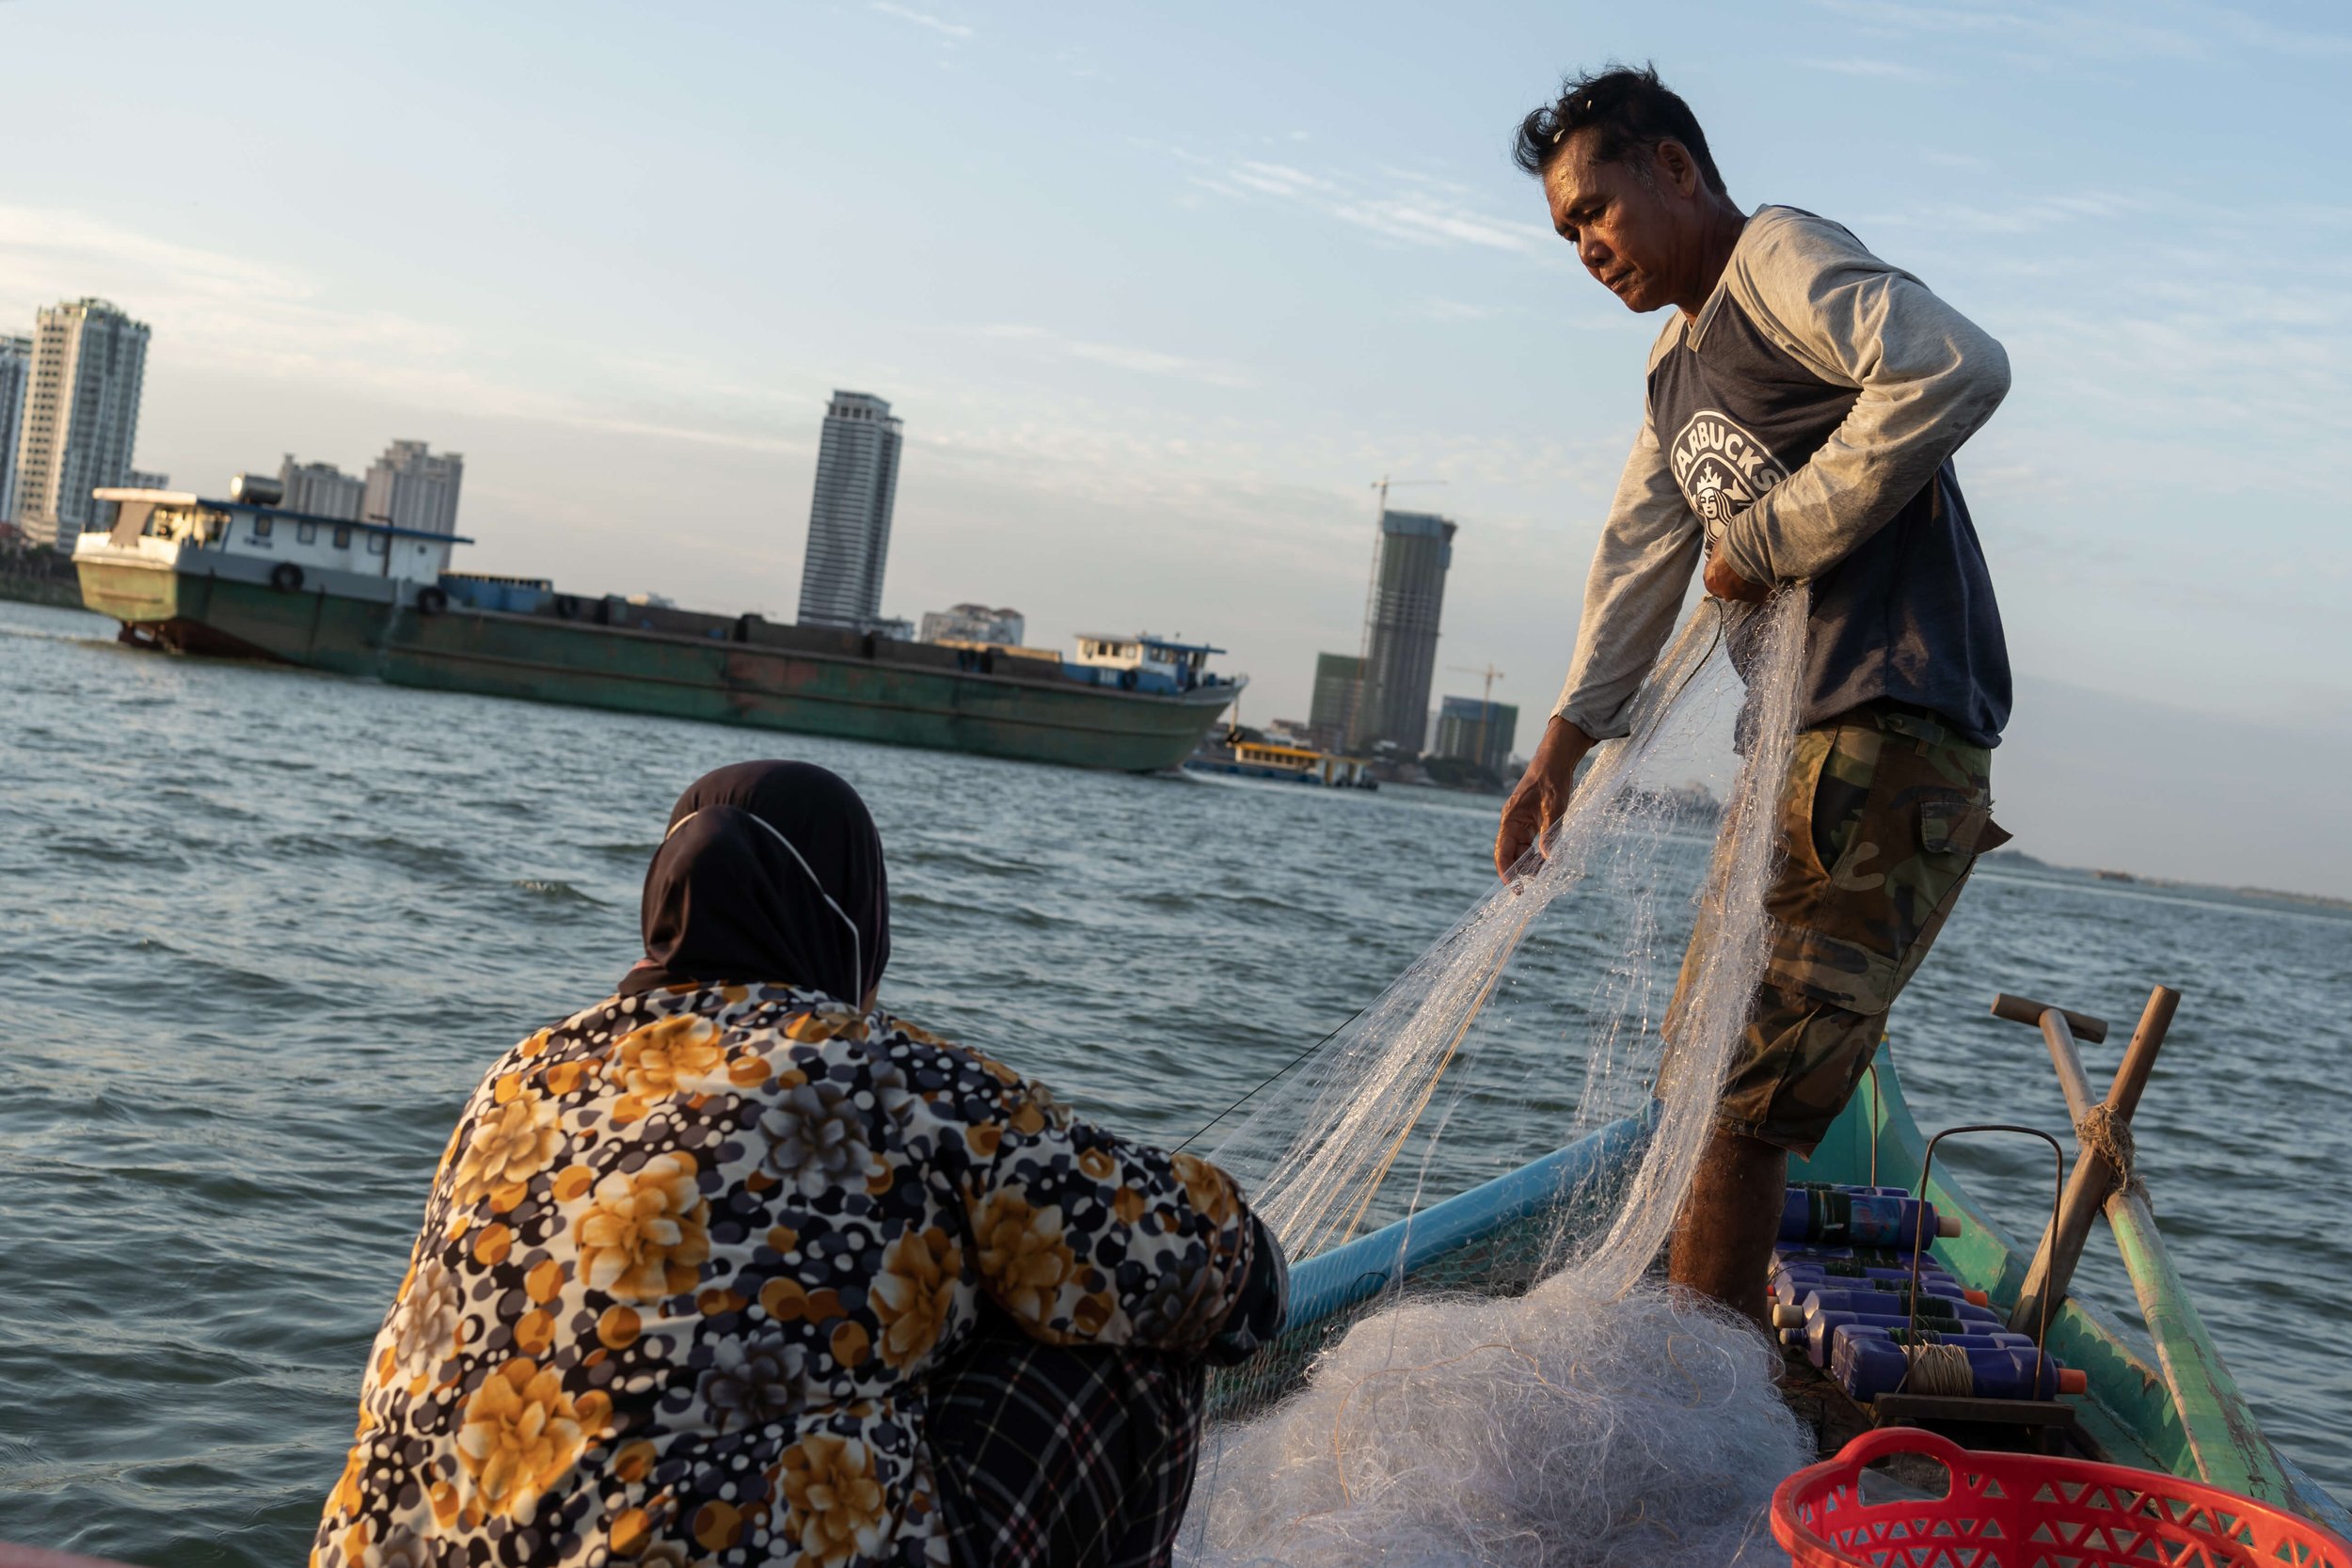  Om Vi (right) and Chip Srey Vas pull up their nets as a sand dredger drives past. They are one of 600,000 Cham people in Cambodia, an ethnic minority considered descendents of the Champa kingdom, who rely on the Mekong River for its fisheries. In 19